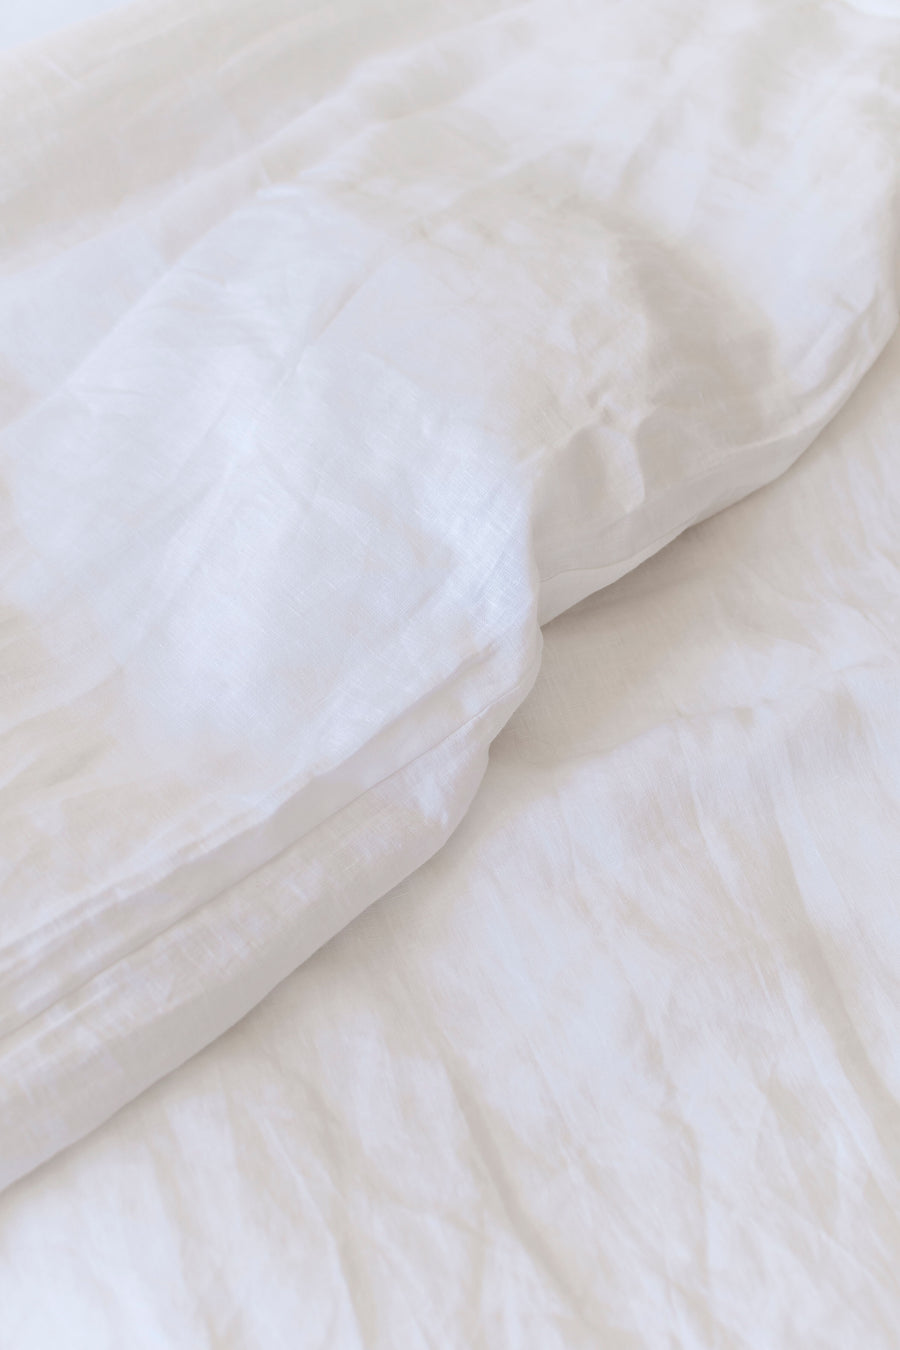 French Linen Sheets